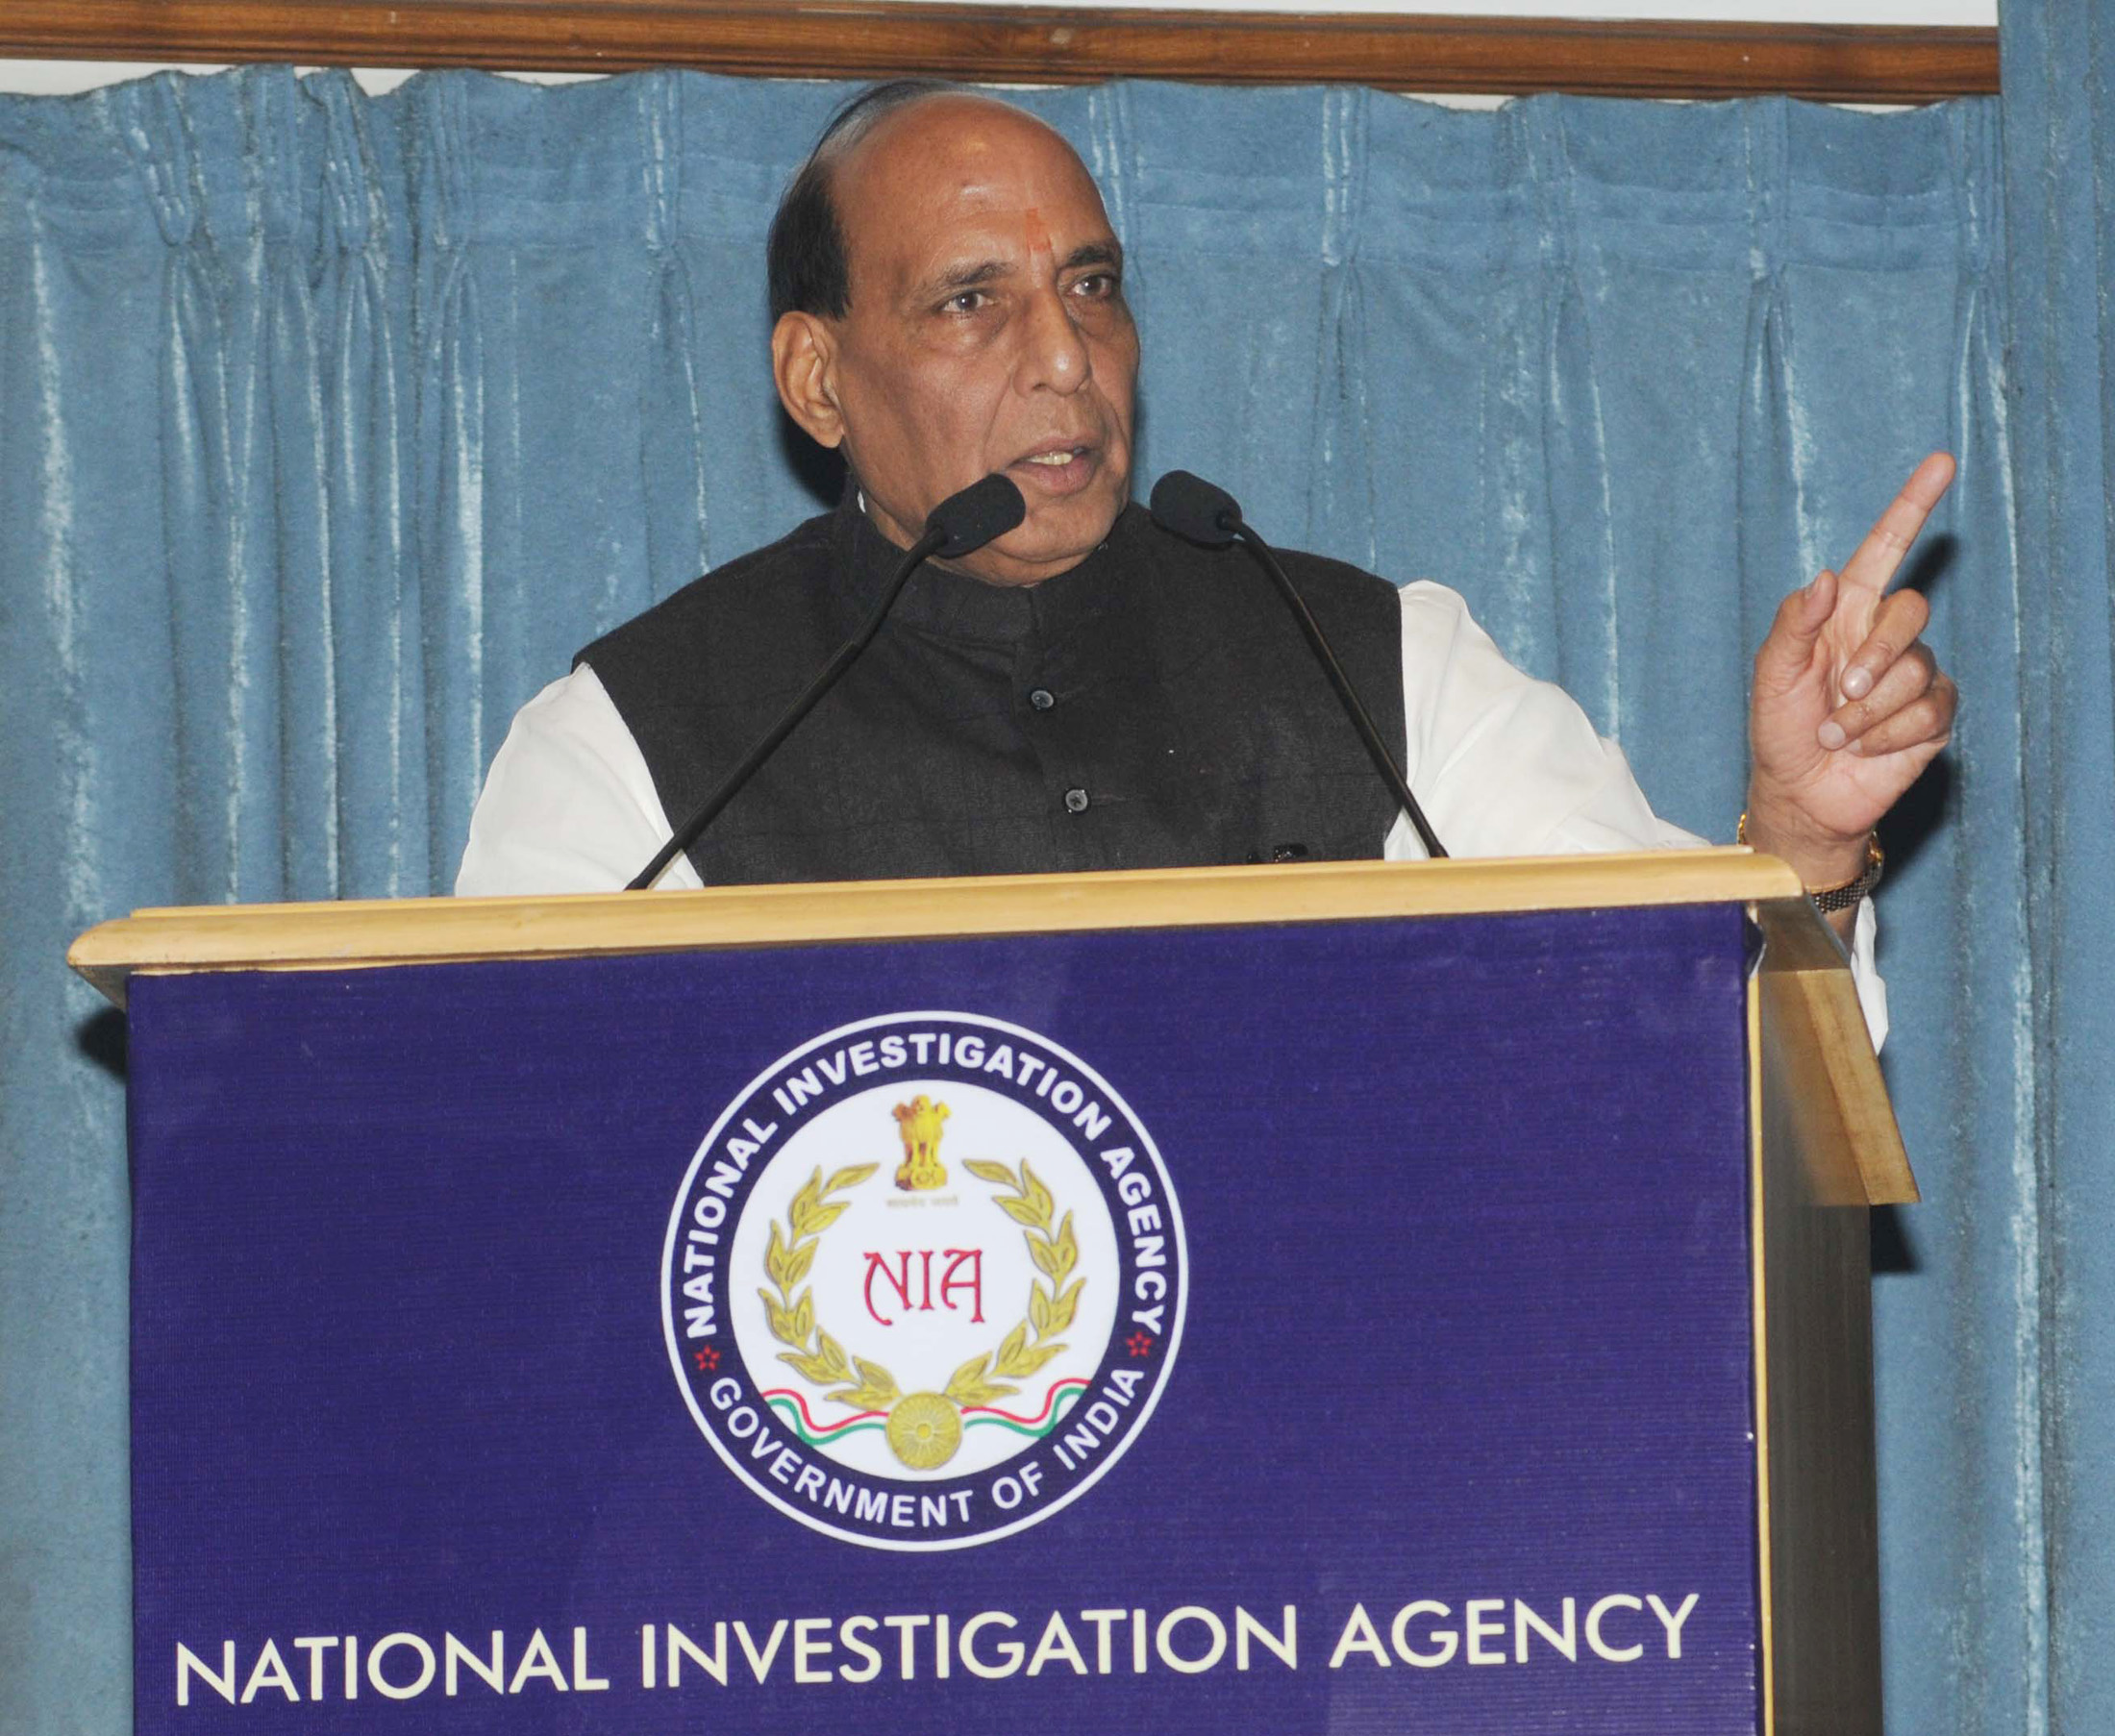 The Union Home Minister, Shri Rajnath Singh addressing at the National Investigation Agency (NIA) Day, in New Delhi on January 19, 2016.